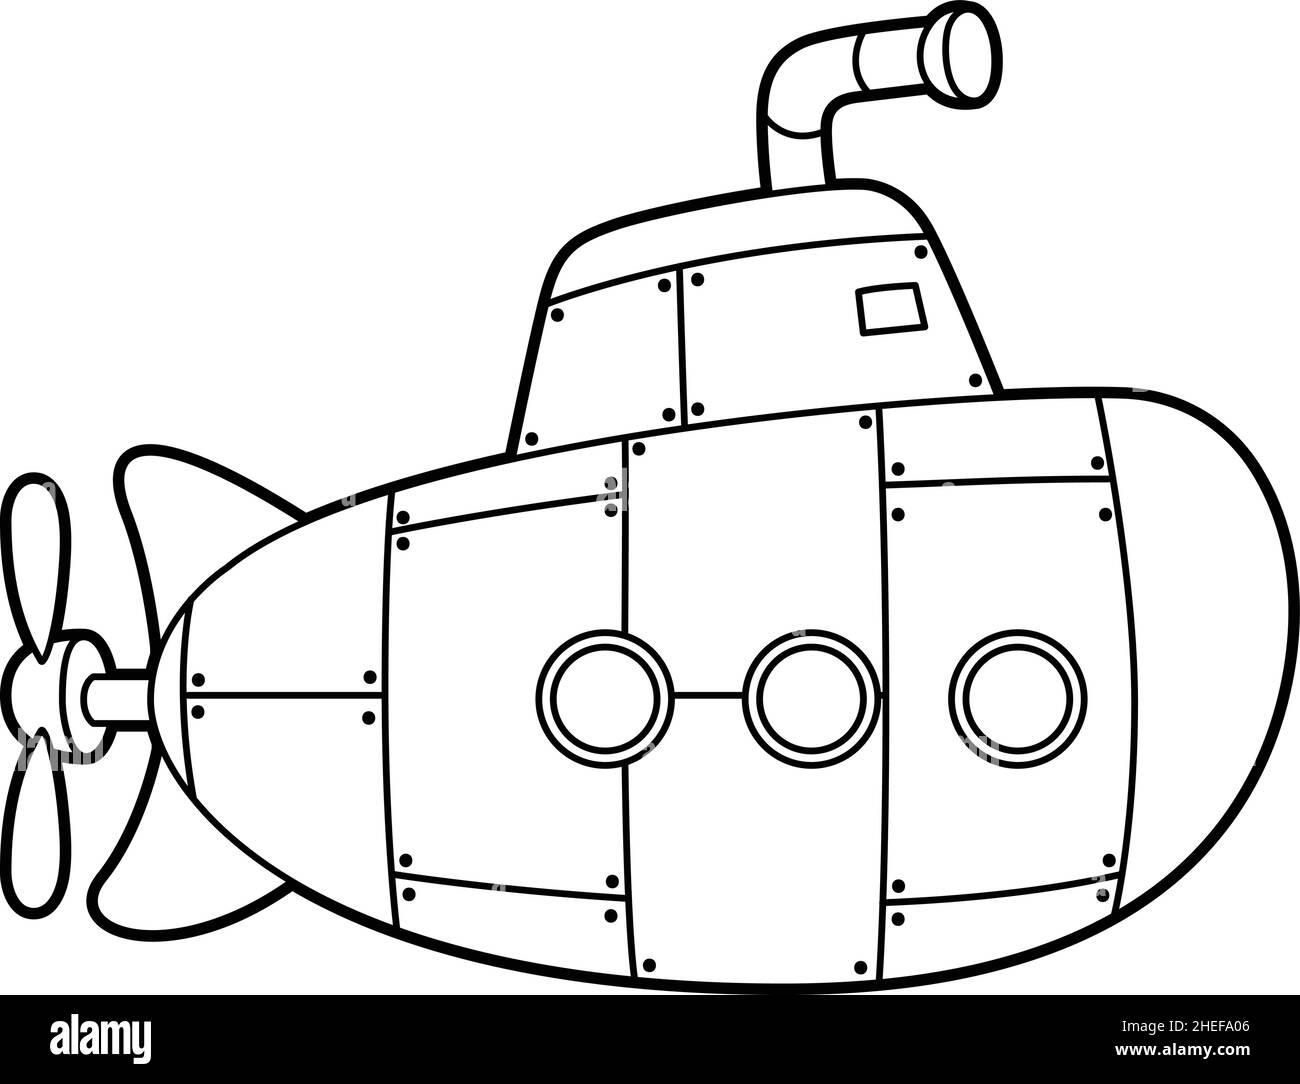 Submarine Coloring Page Isolated for Kids Stock Vector